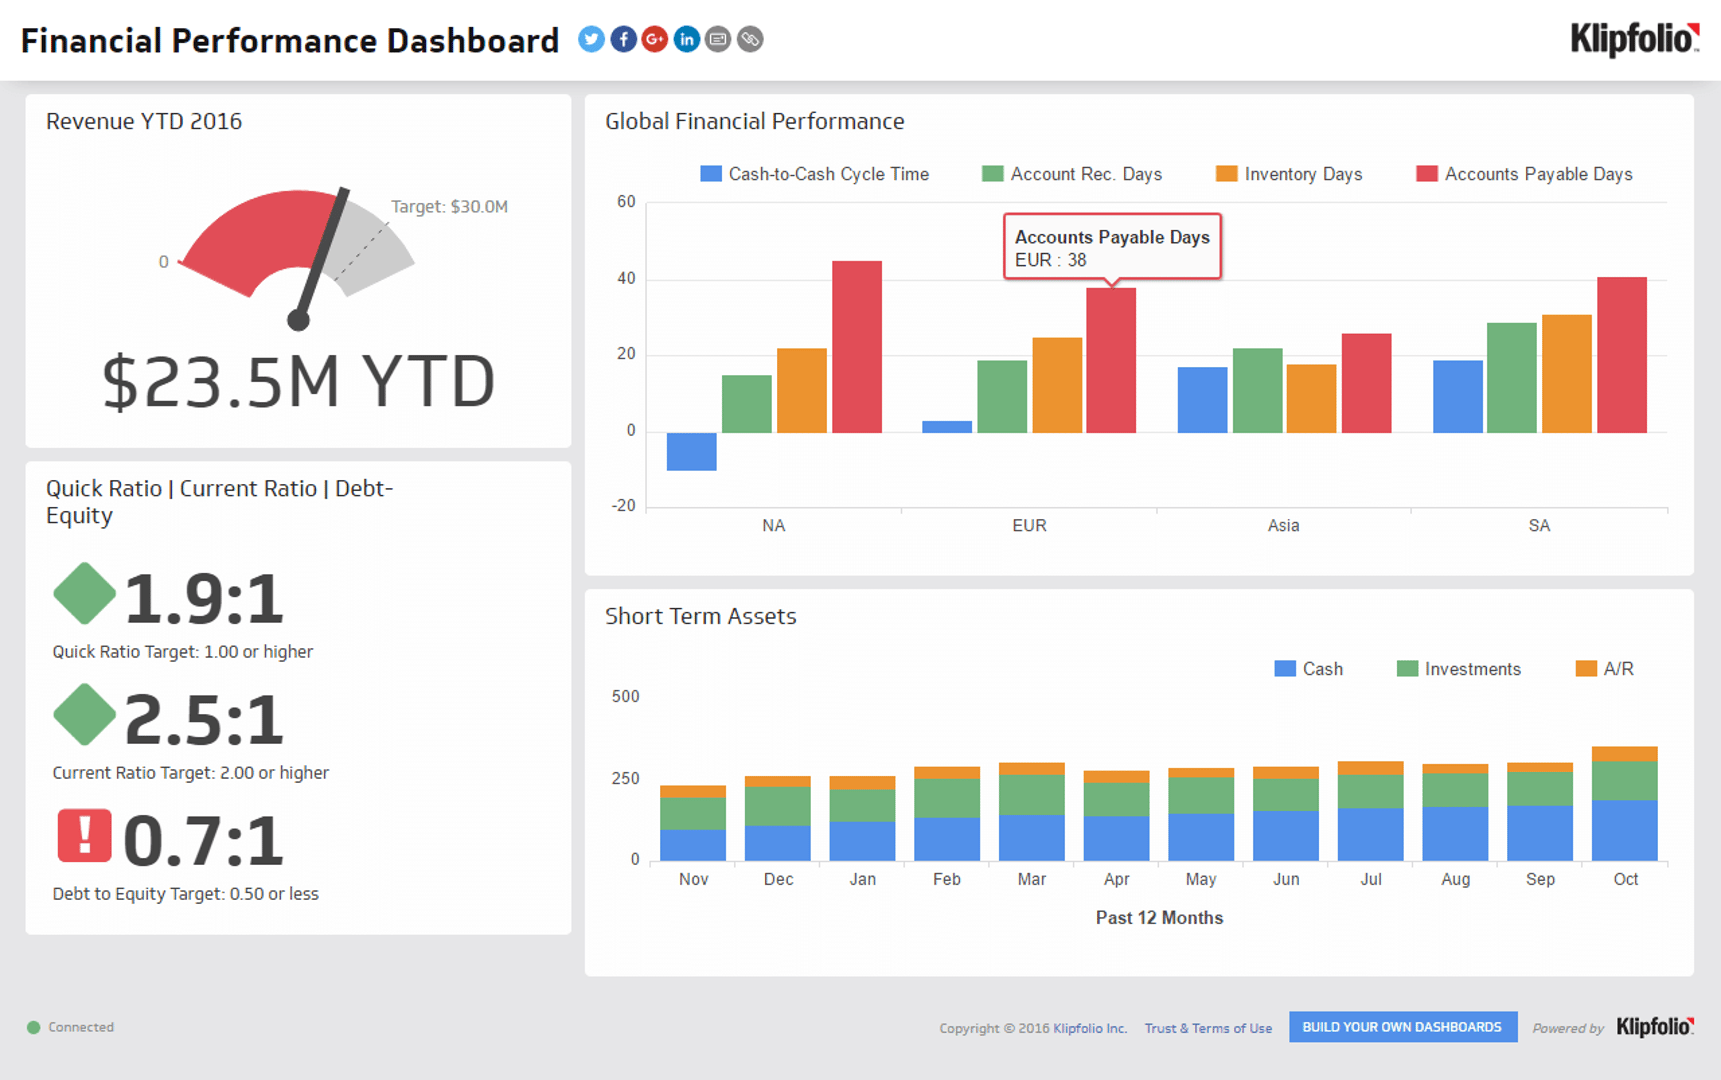 Related Dashboard Examples - Financial Performance Dashboard